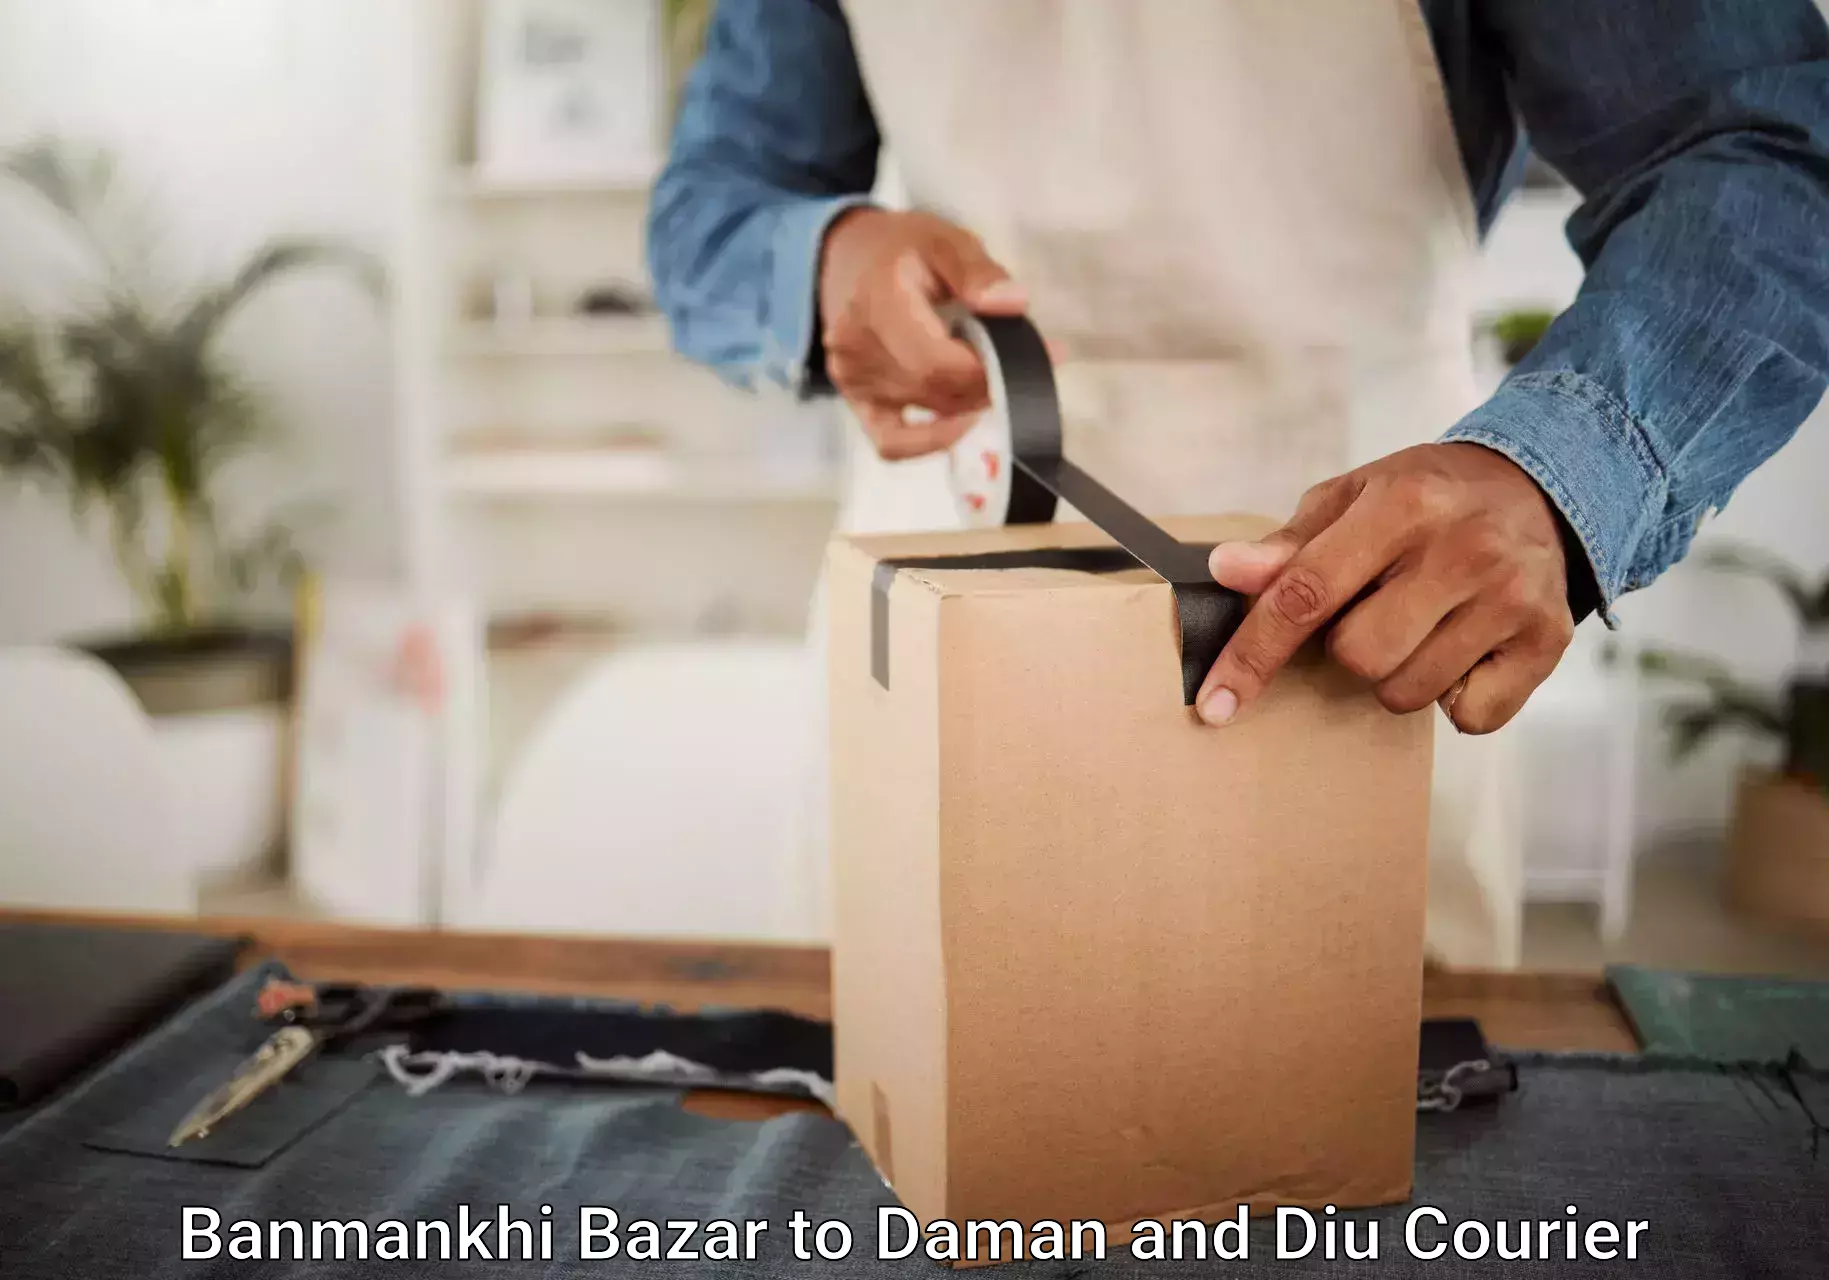 Luggage delivery app Banmankhi Bazar to Daman and Diu